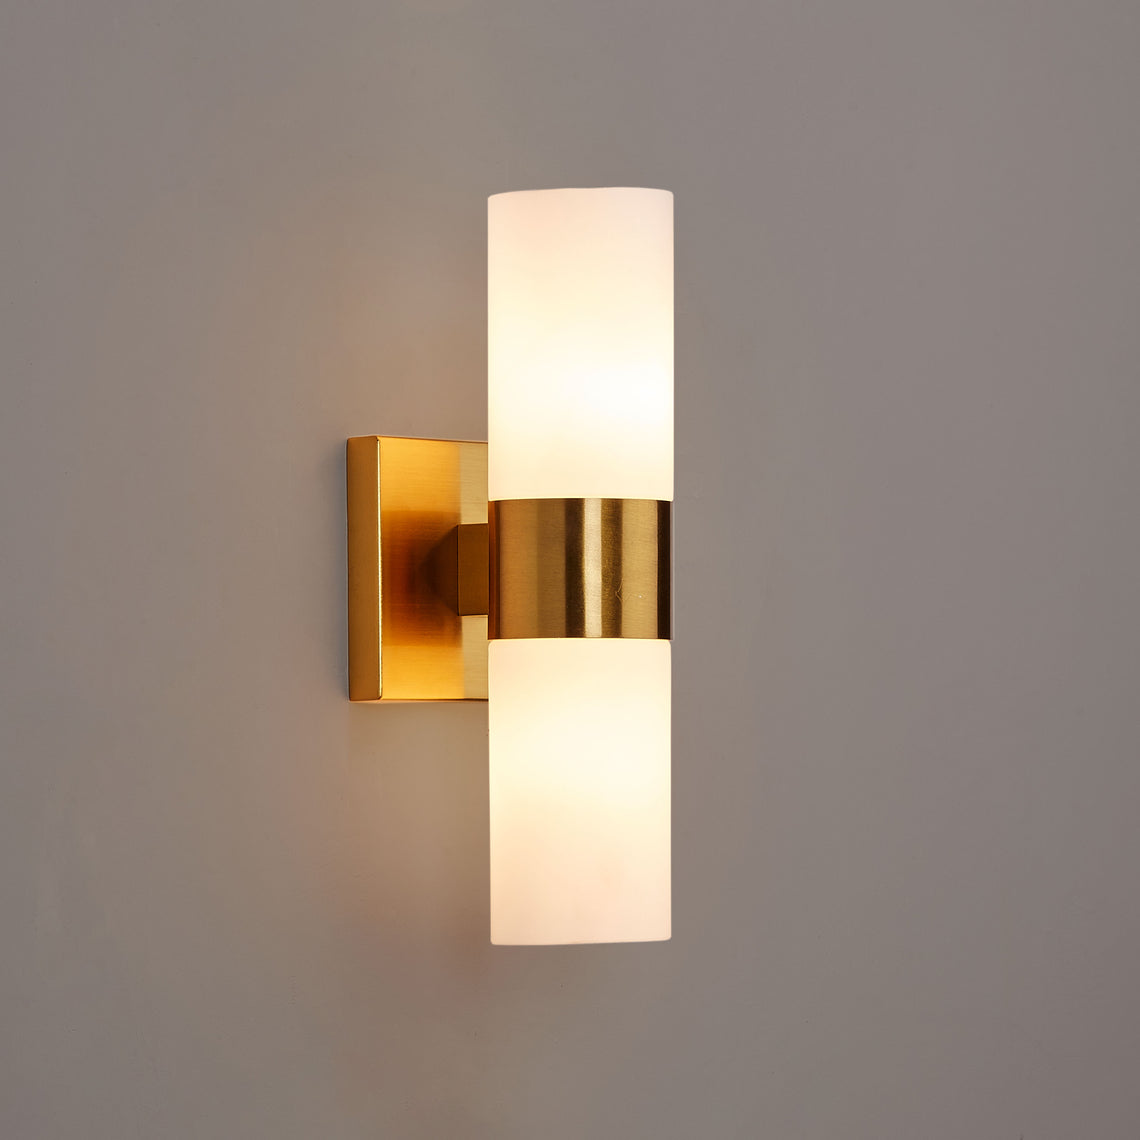 2-Lights Wall Sconce Fixtures, Brushed Brass Finish, Dimension: L13.5